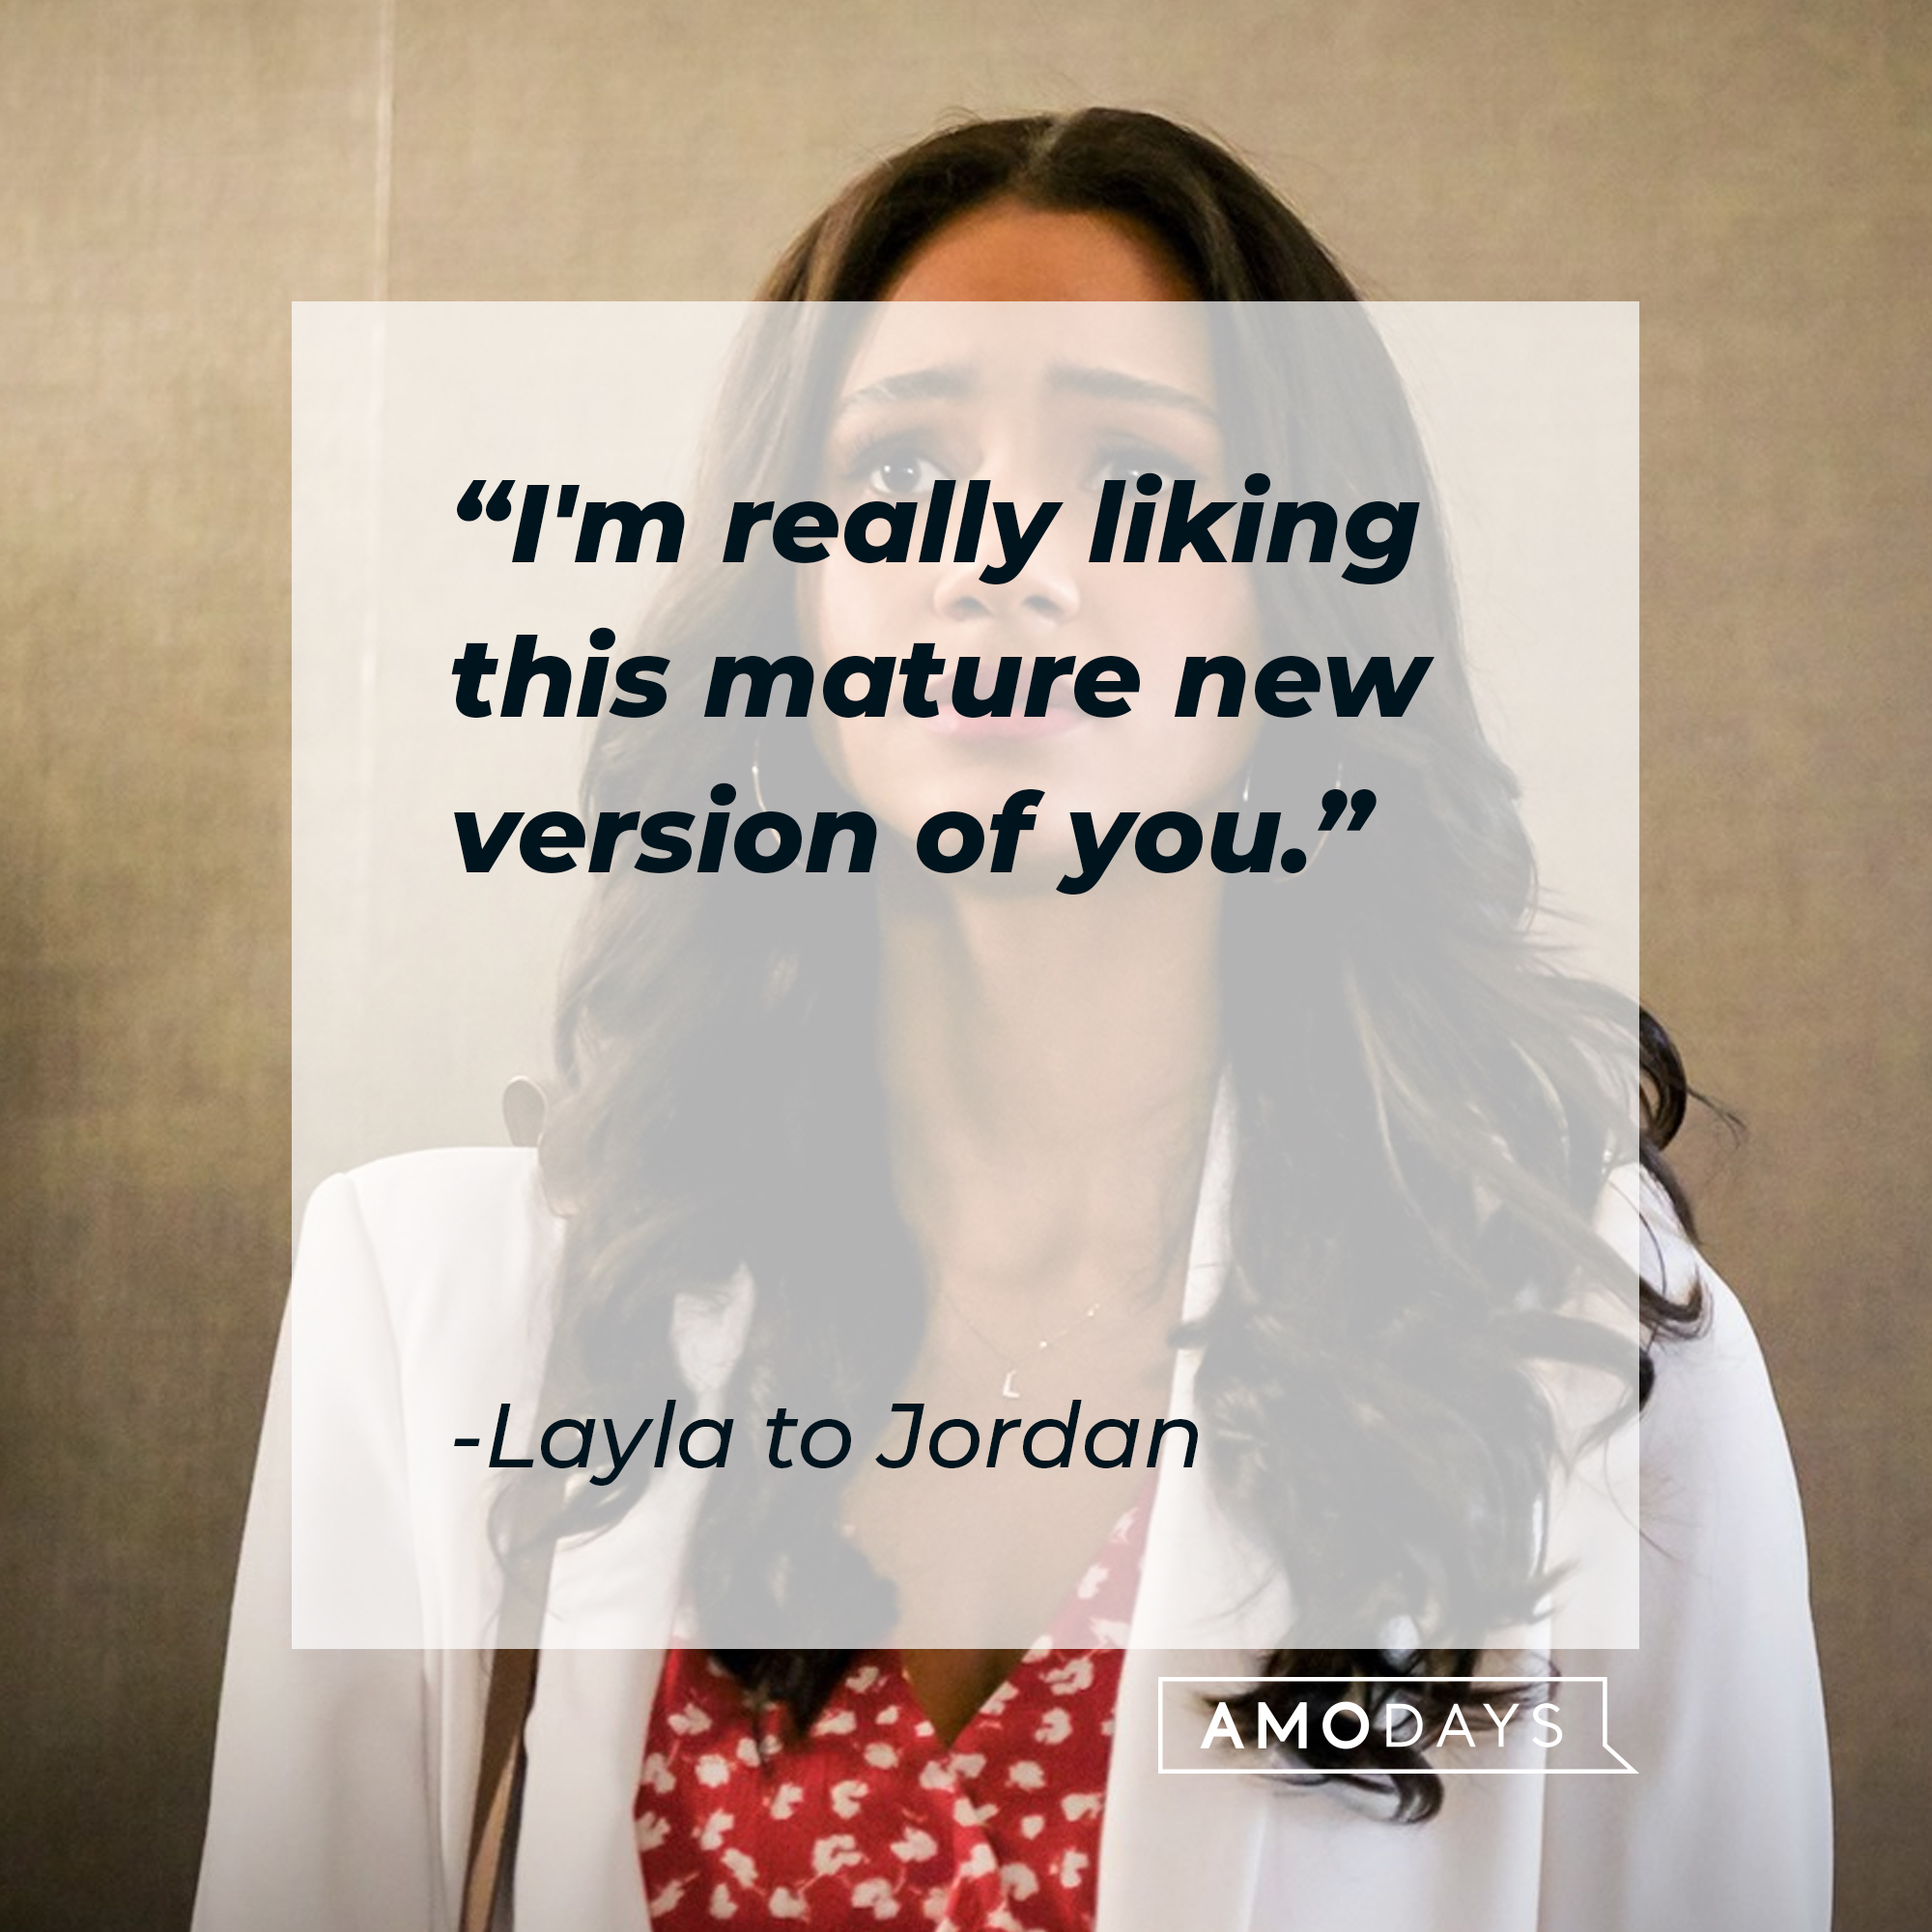 A quote from Layla to Jordan:"I'm really liking this mature new version of you." | Source: facebook.com/CWAllAmerican